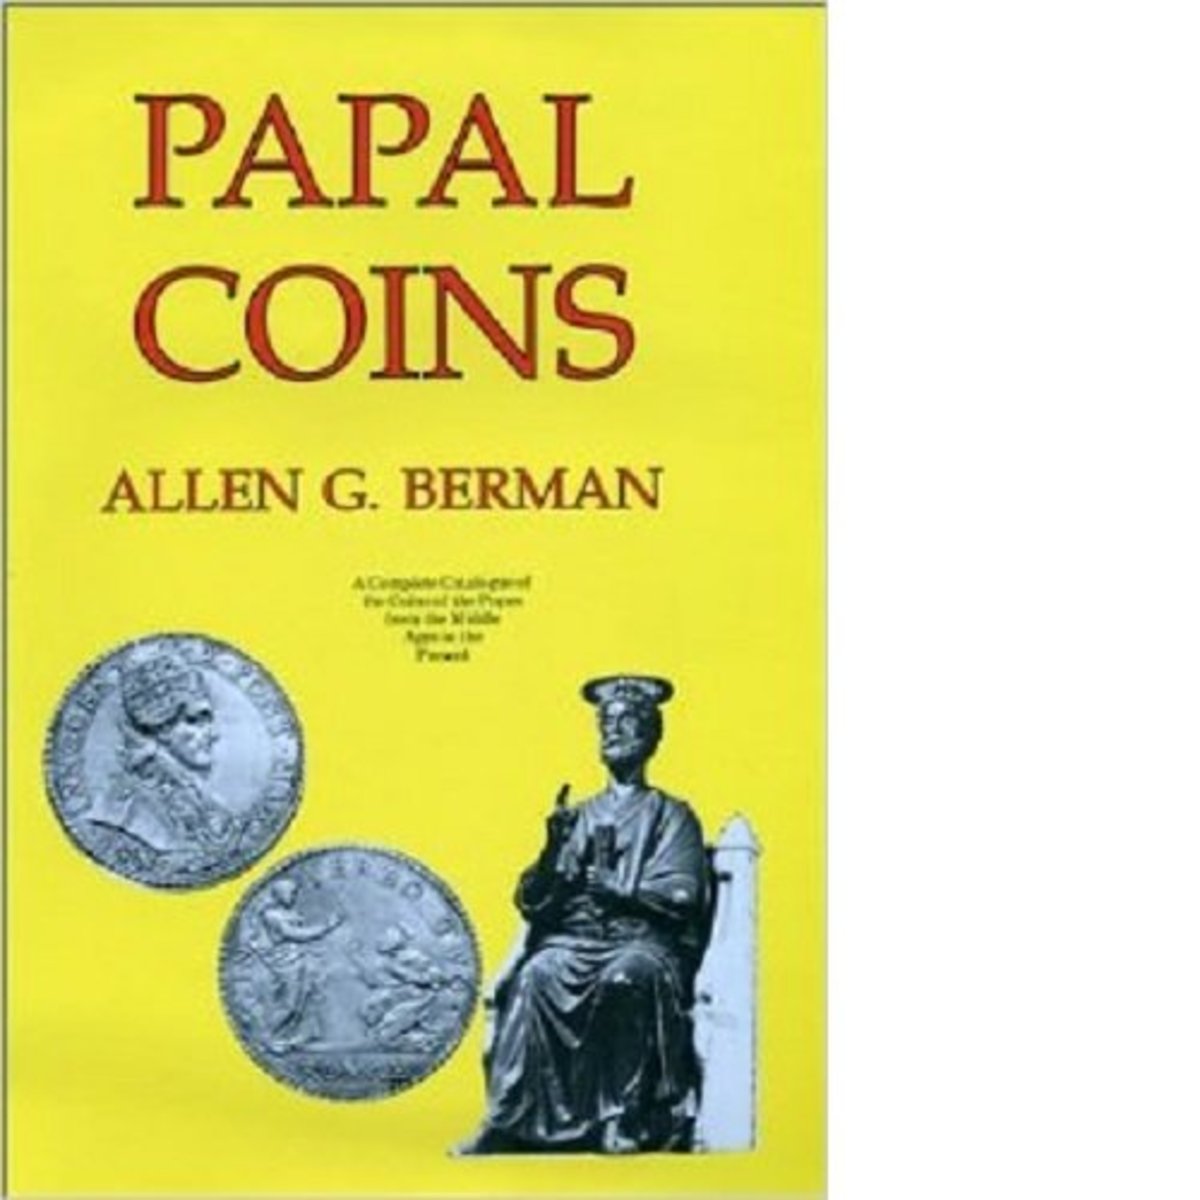 Papal coins are produced in gold, silver, and bronze.